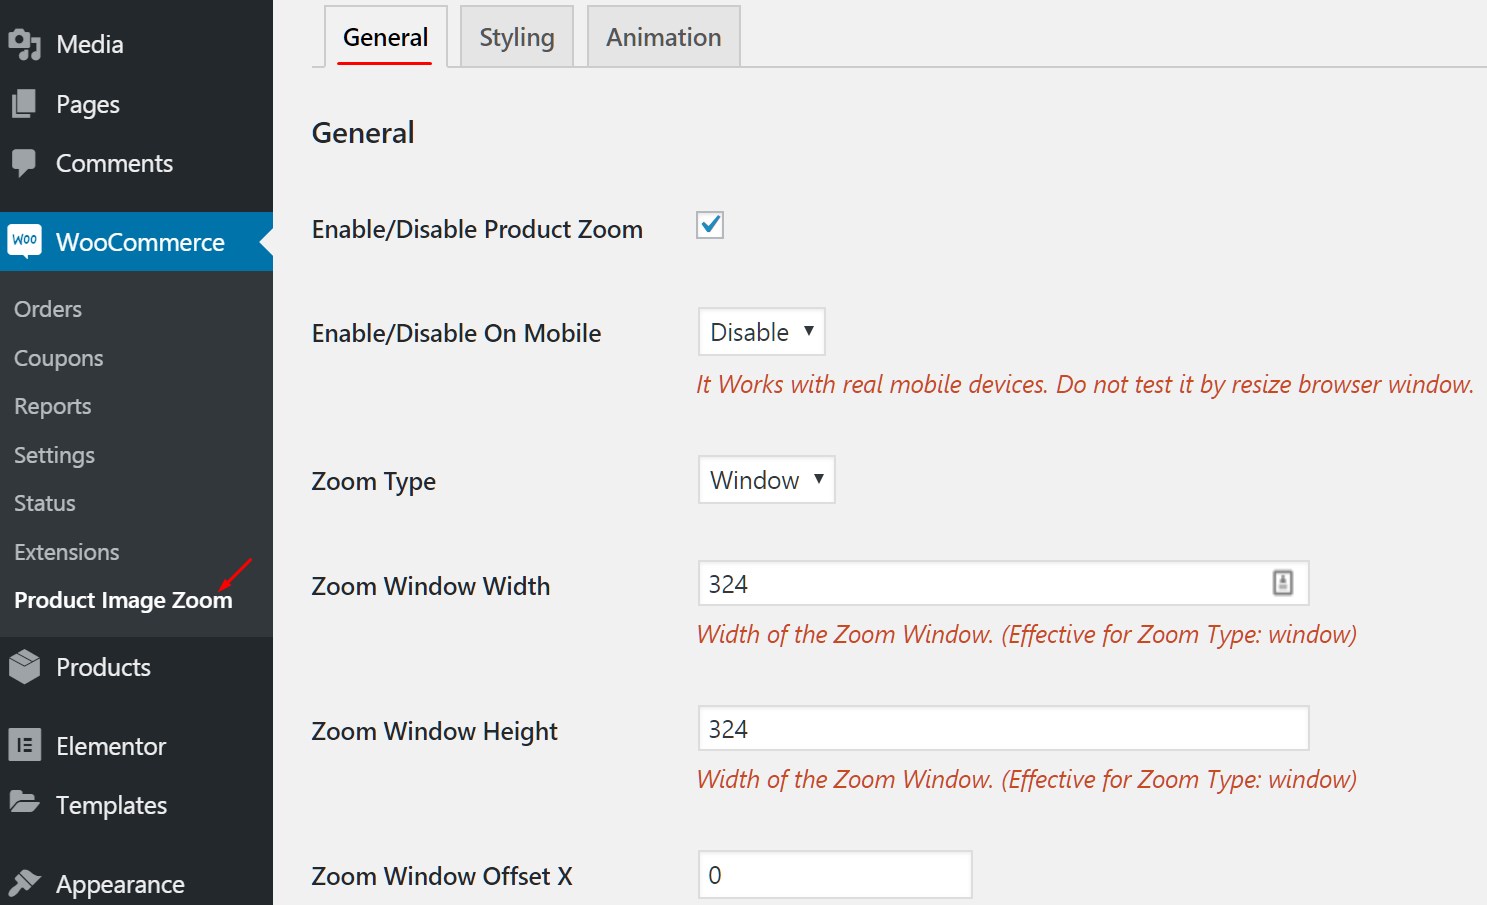 General options to configure the zoom image